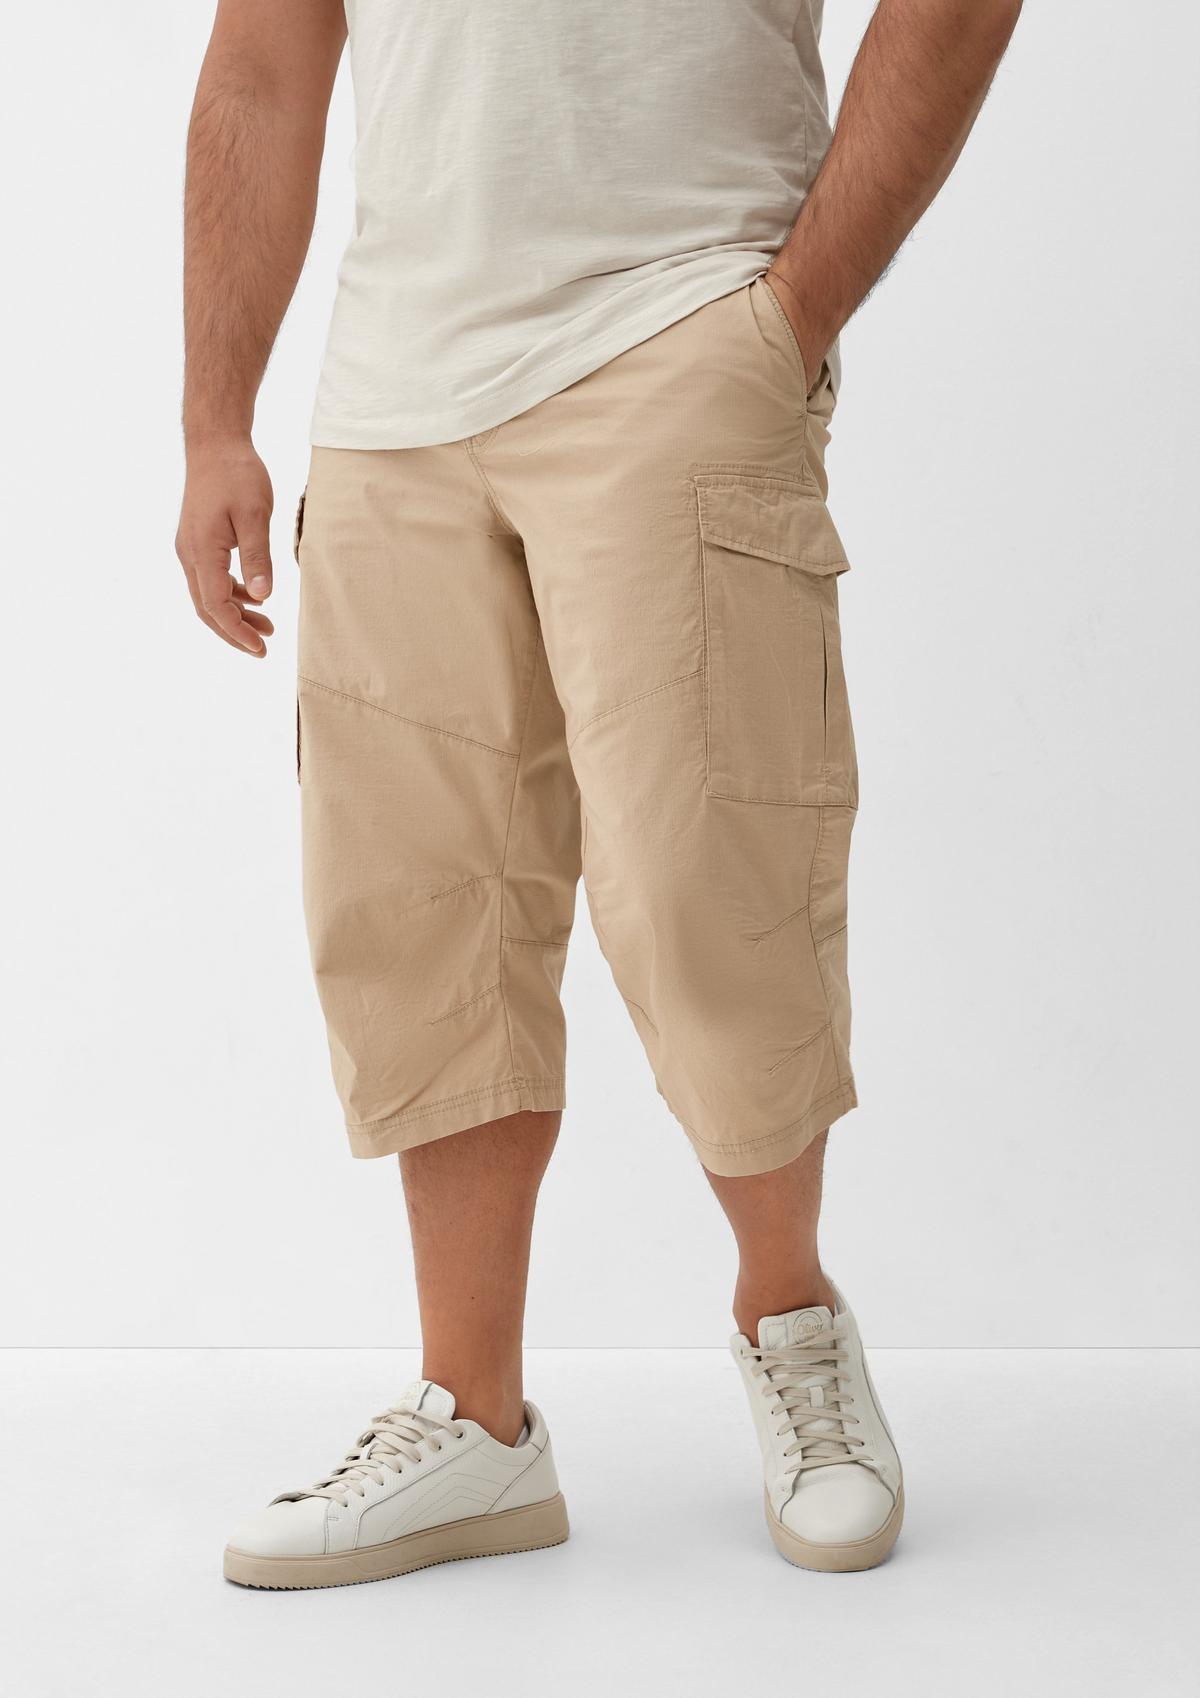 - with Bermudas olive pockets Relaxed cargo fit: